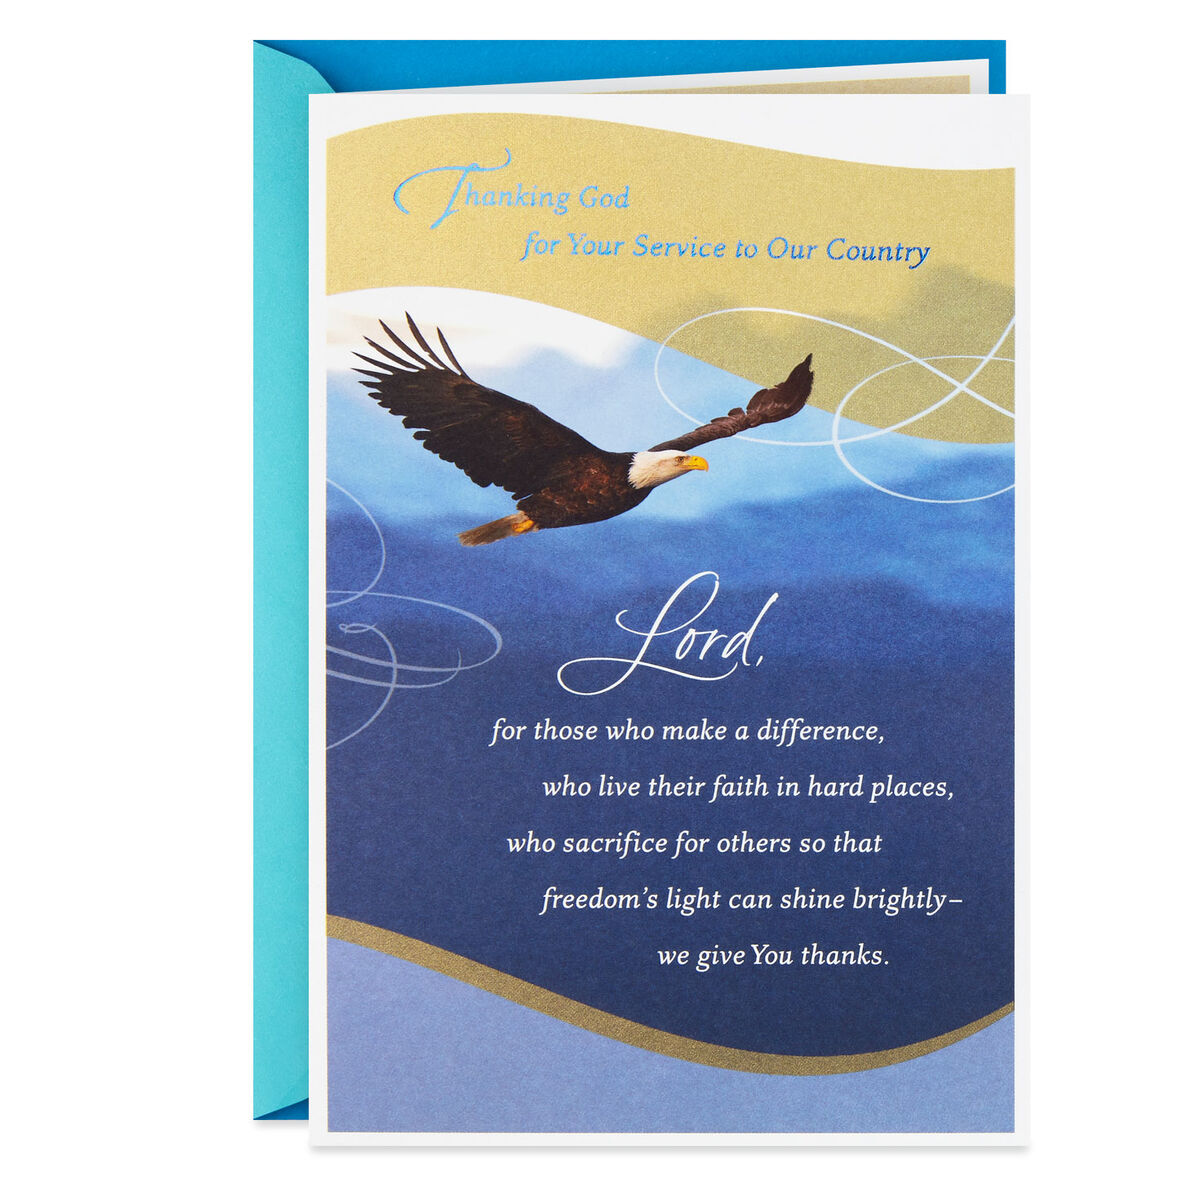 Thanking God for Your Service Religious Veterans Day Card - Greeting Cards - Hallmark